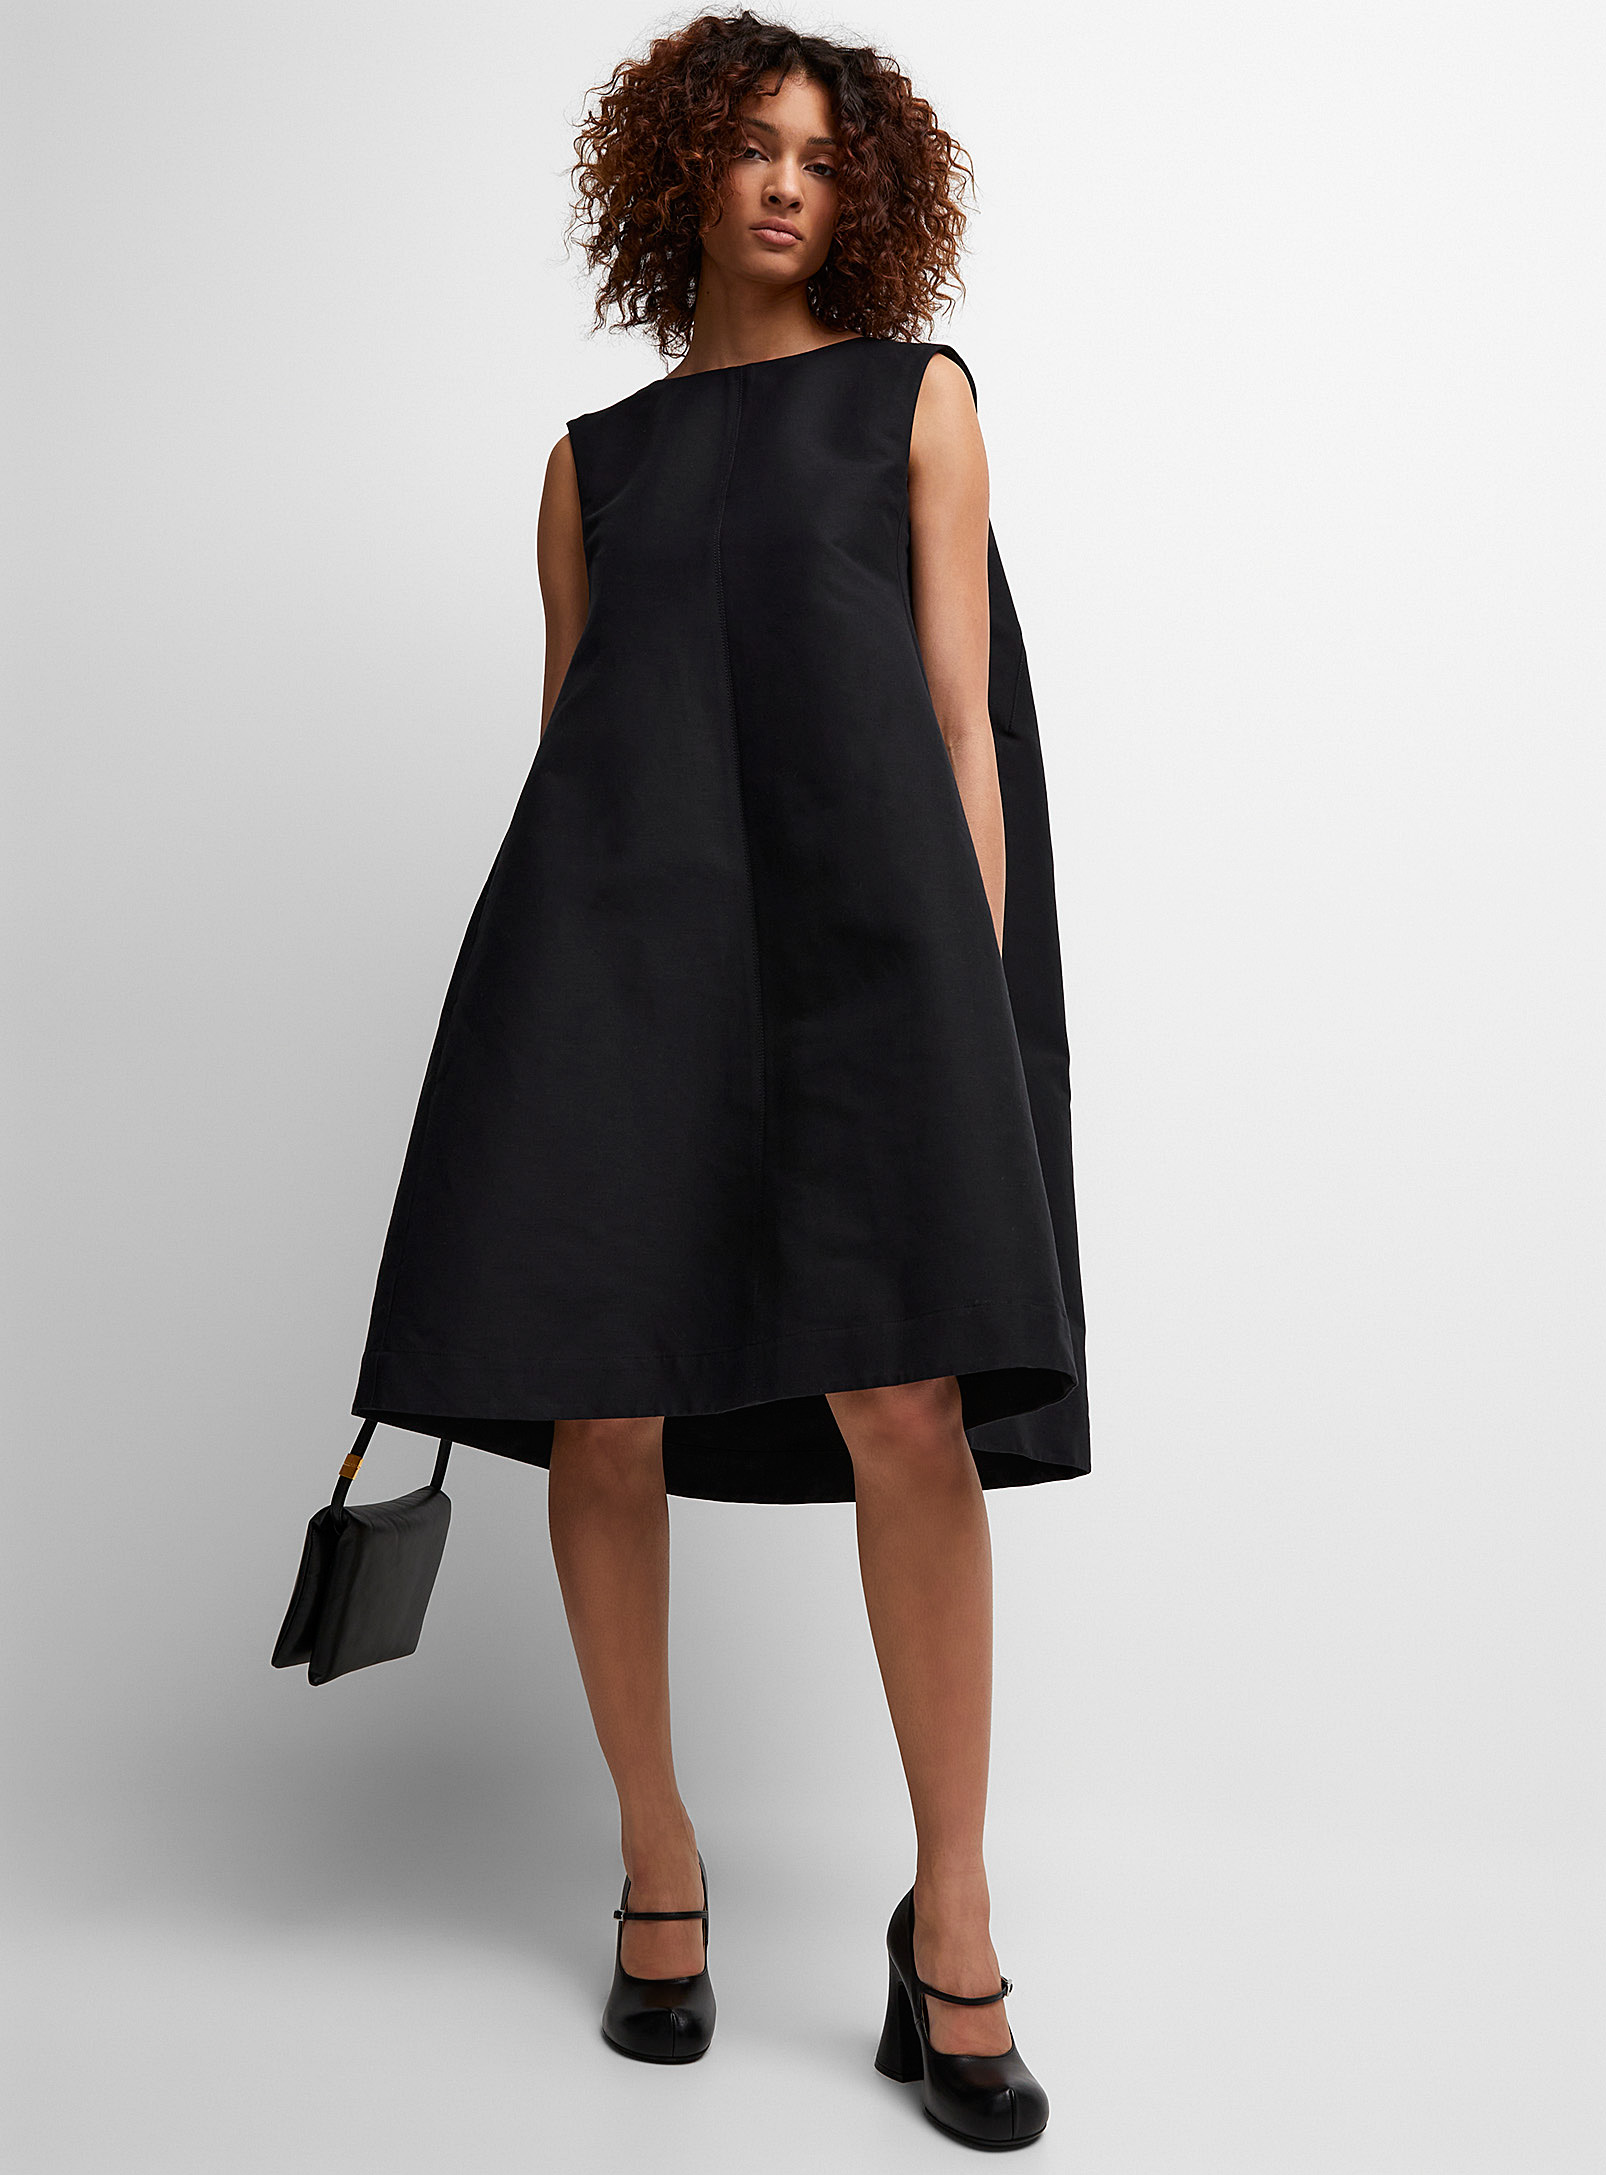 MARNI - Women's Loose structured cotton dress